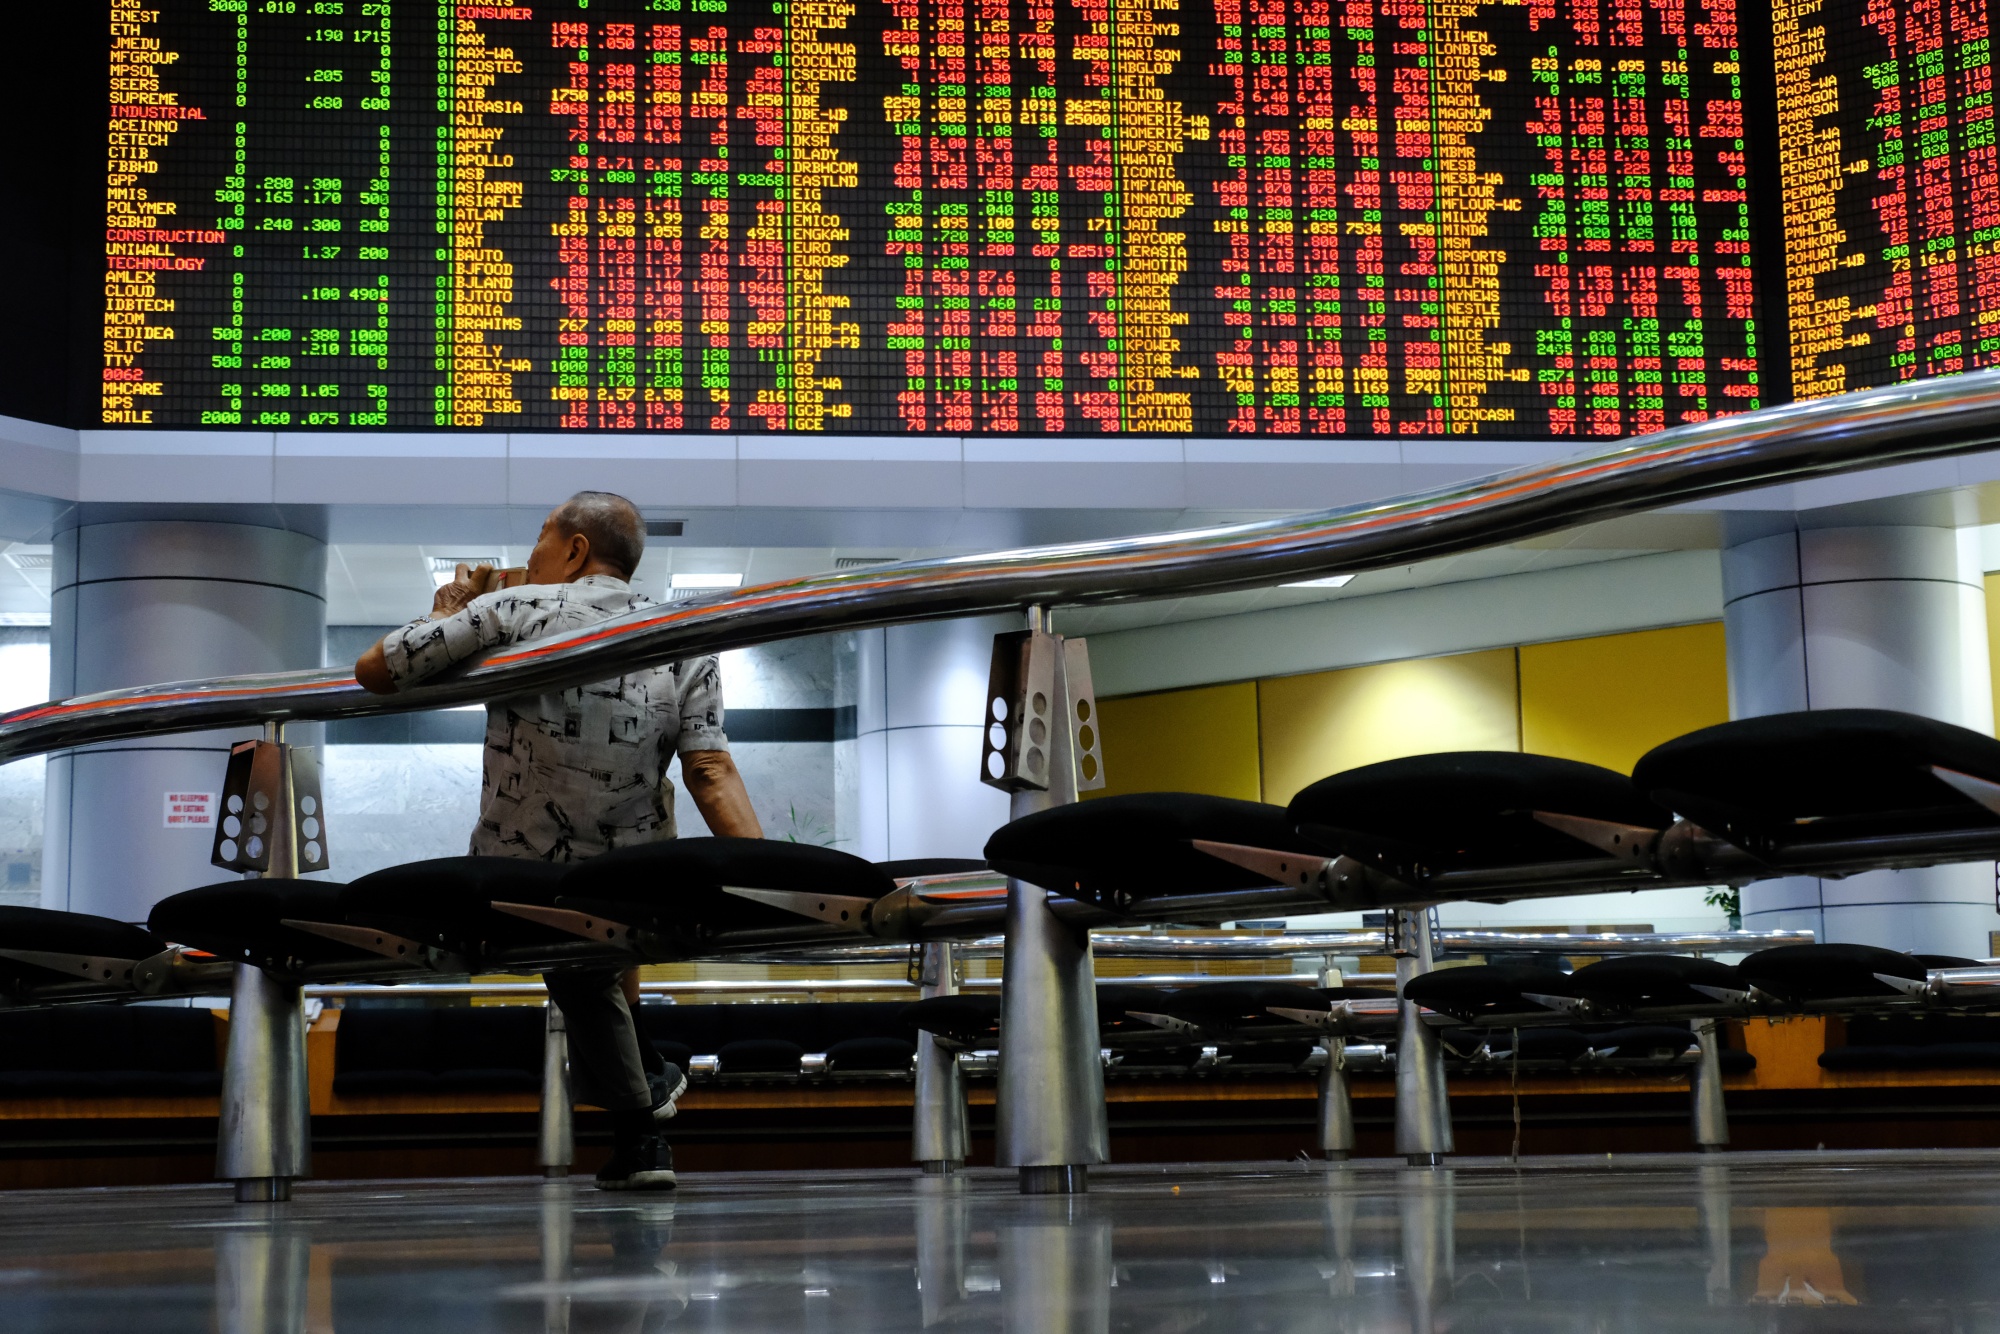 A man looks at stock prices displayed in the trading gallery of the RHB Investment Bank headquarters in Kuala Lumpur,&nbsp;Malaysia.